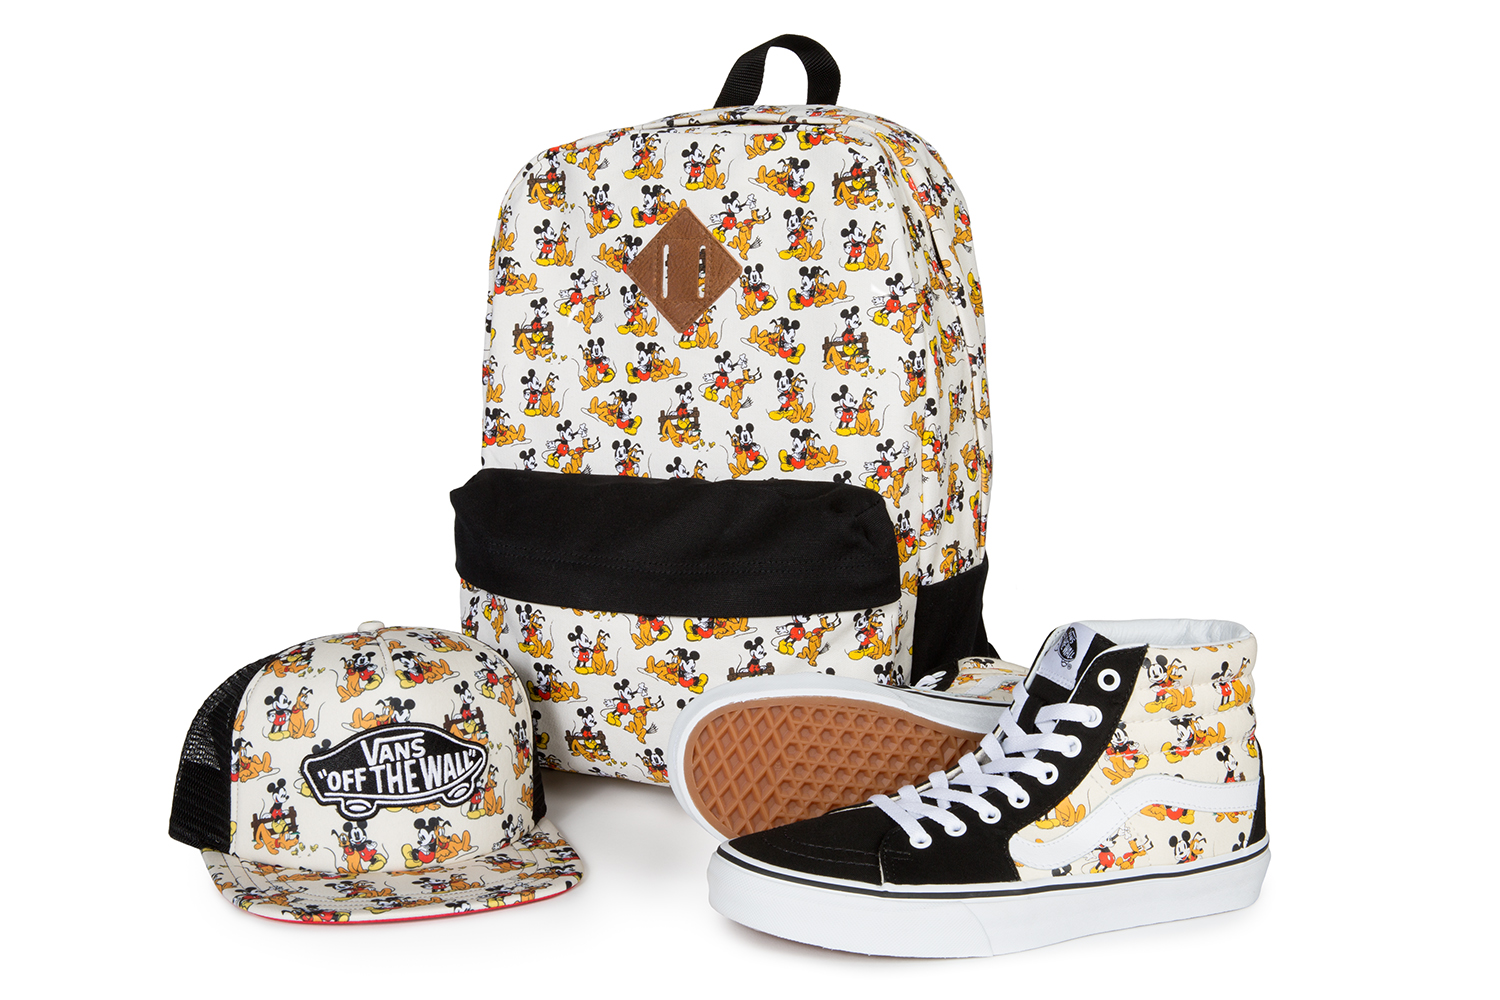 customize your own vans backpack